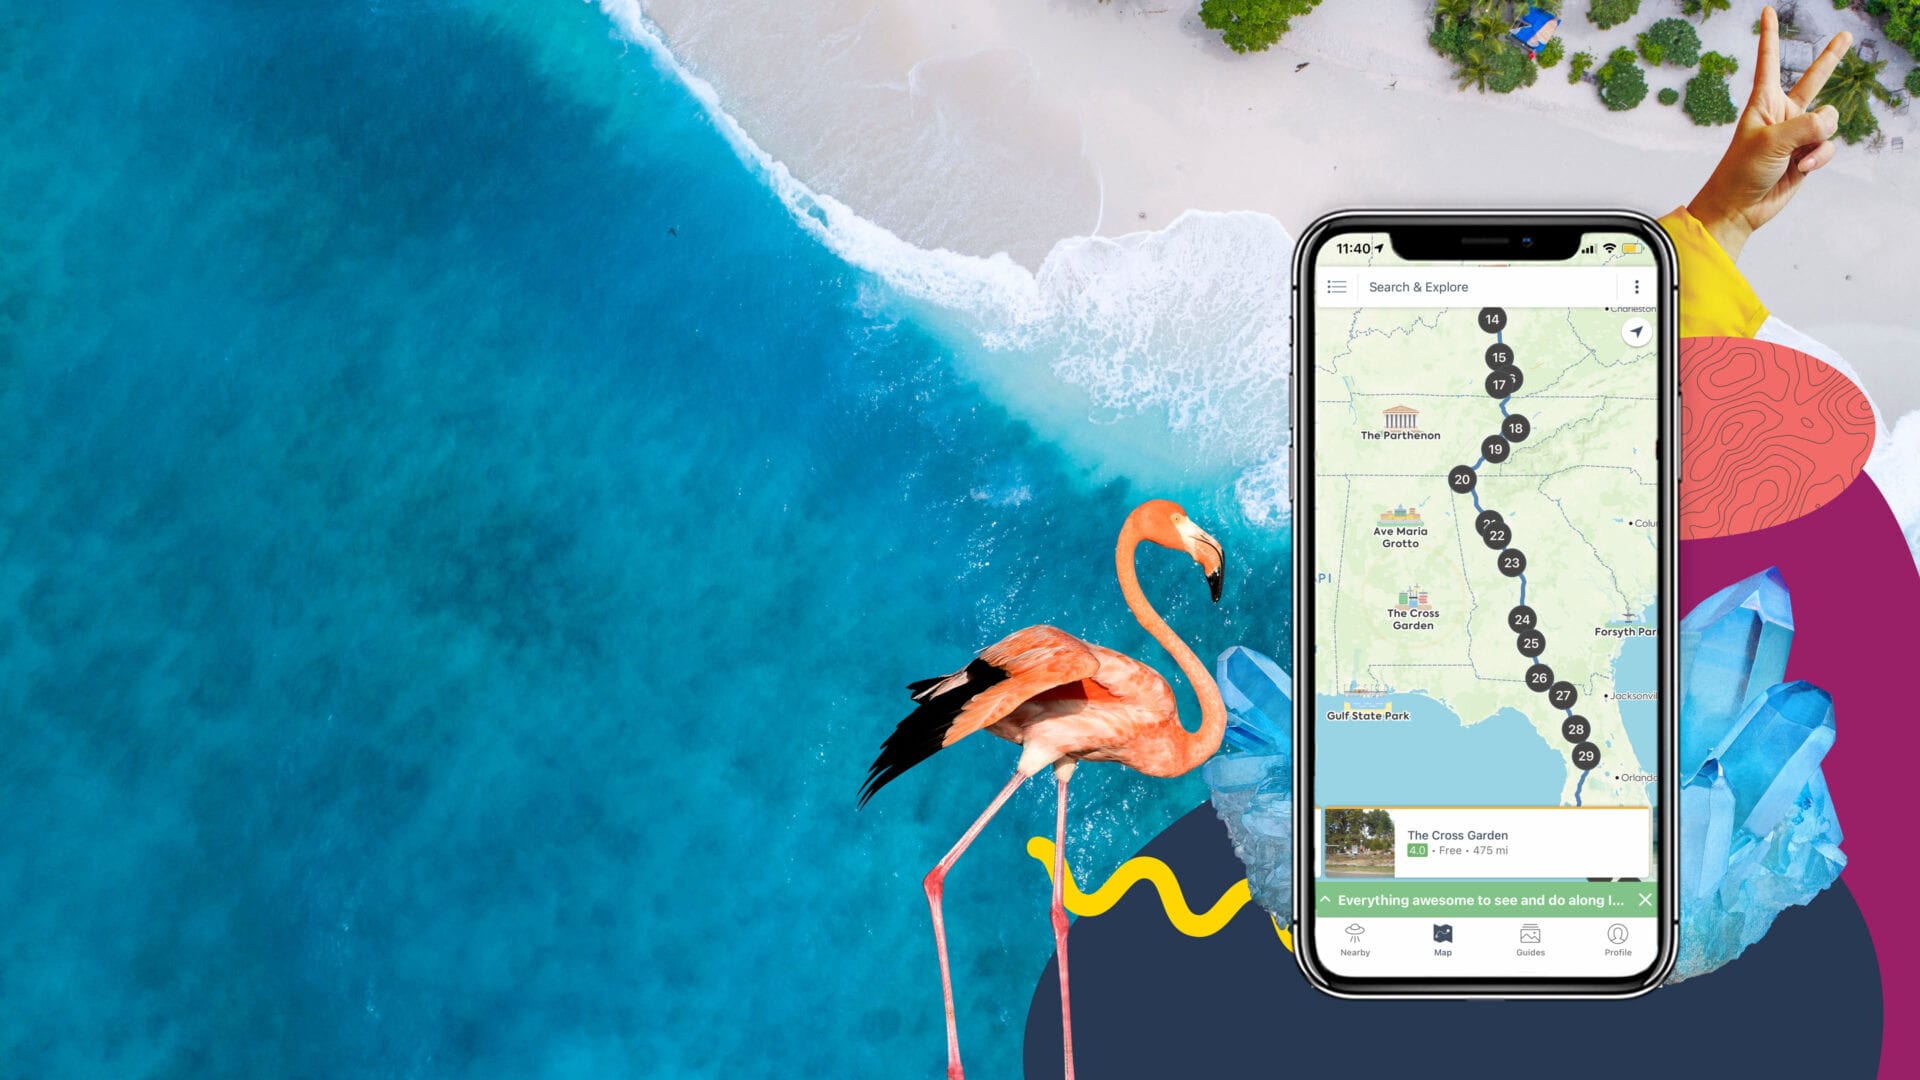 Plan your summer adventure with the #1 road trip planning app.